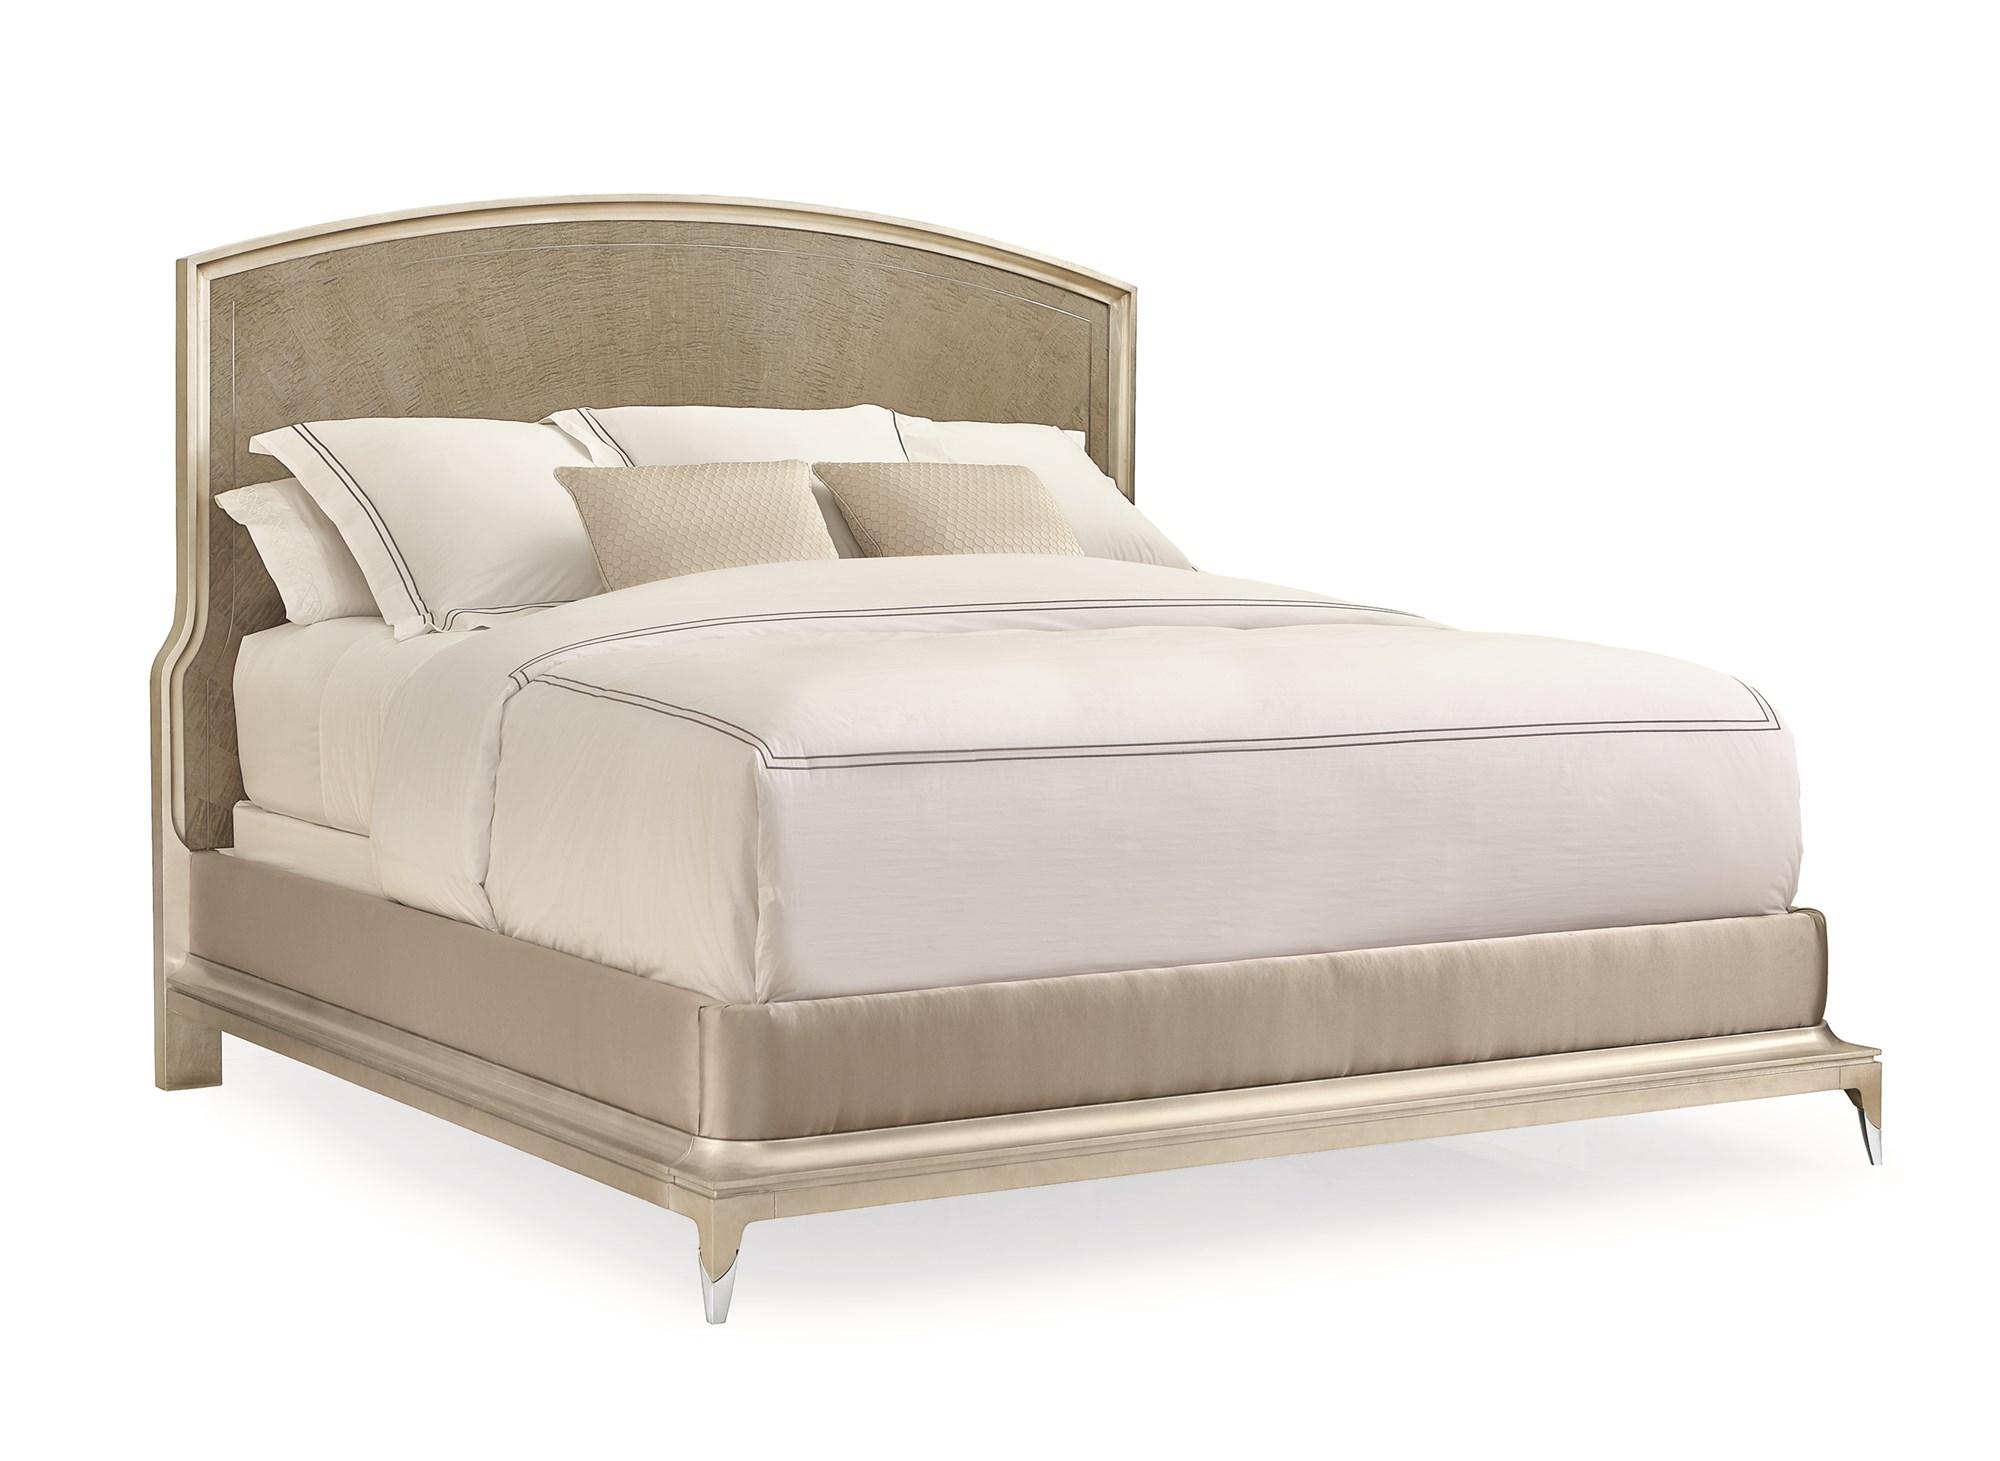 Contemporary Platform Bed RISE TO THE OCCASION CLA-417-145 in Silver, Beige 